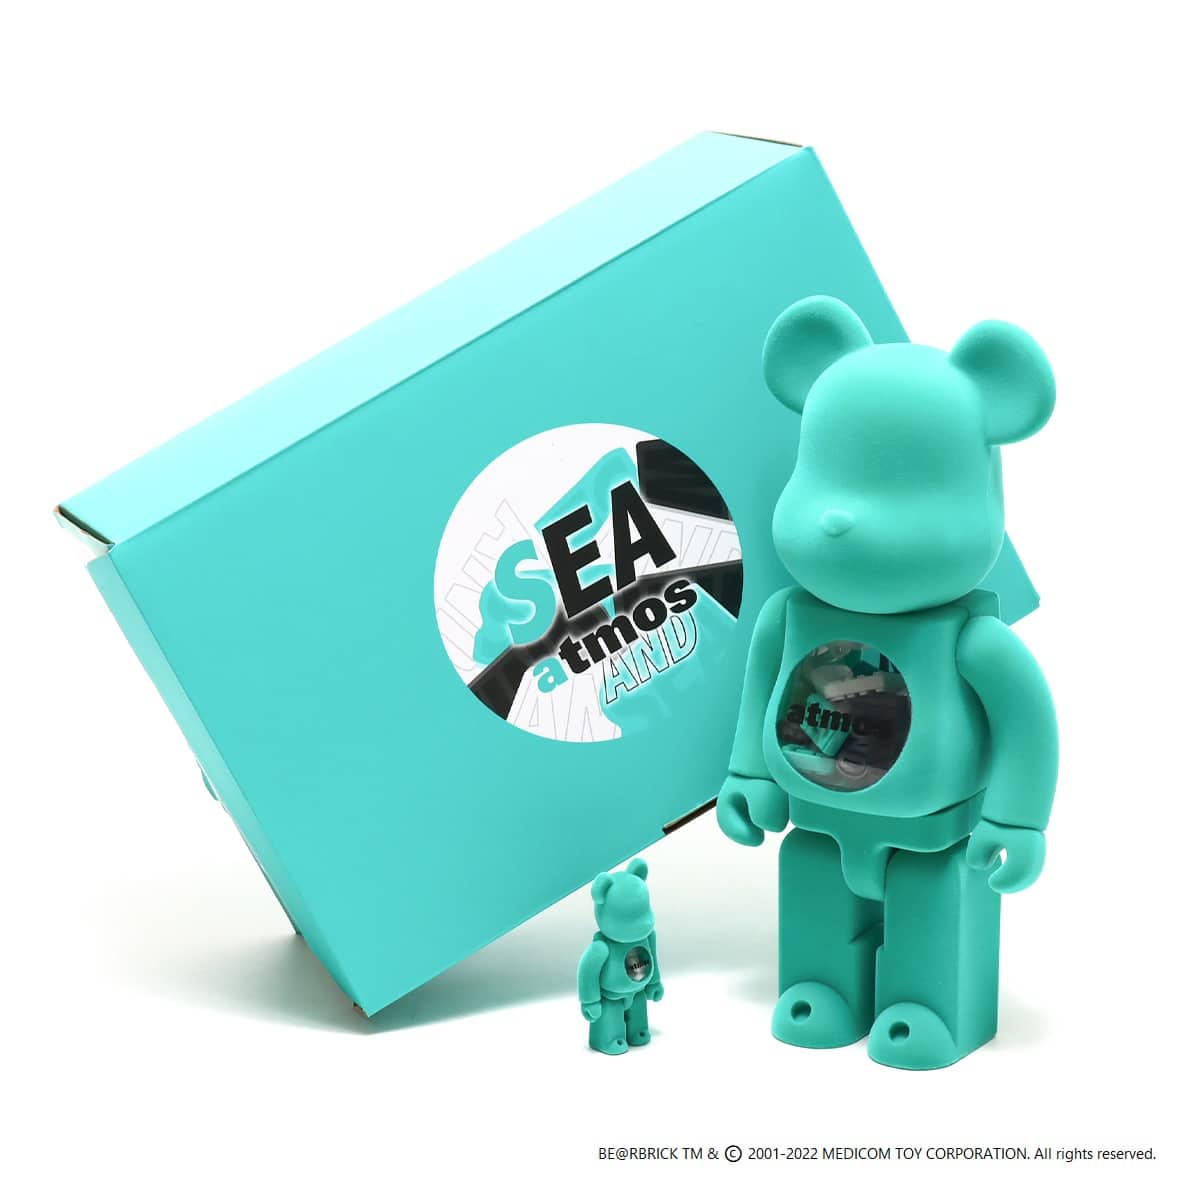 atmos X BE@RBRICK X WIND AND SEA スウェットXL